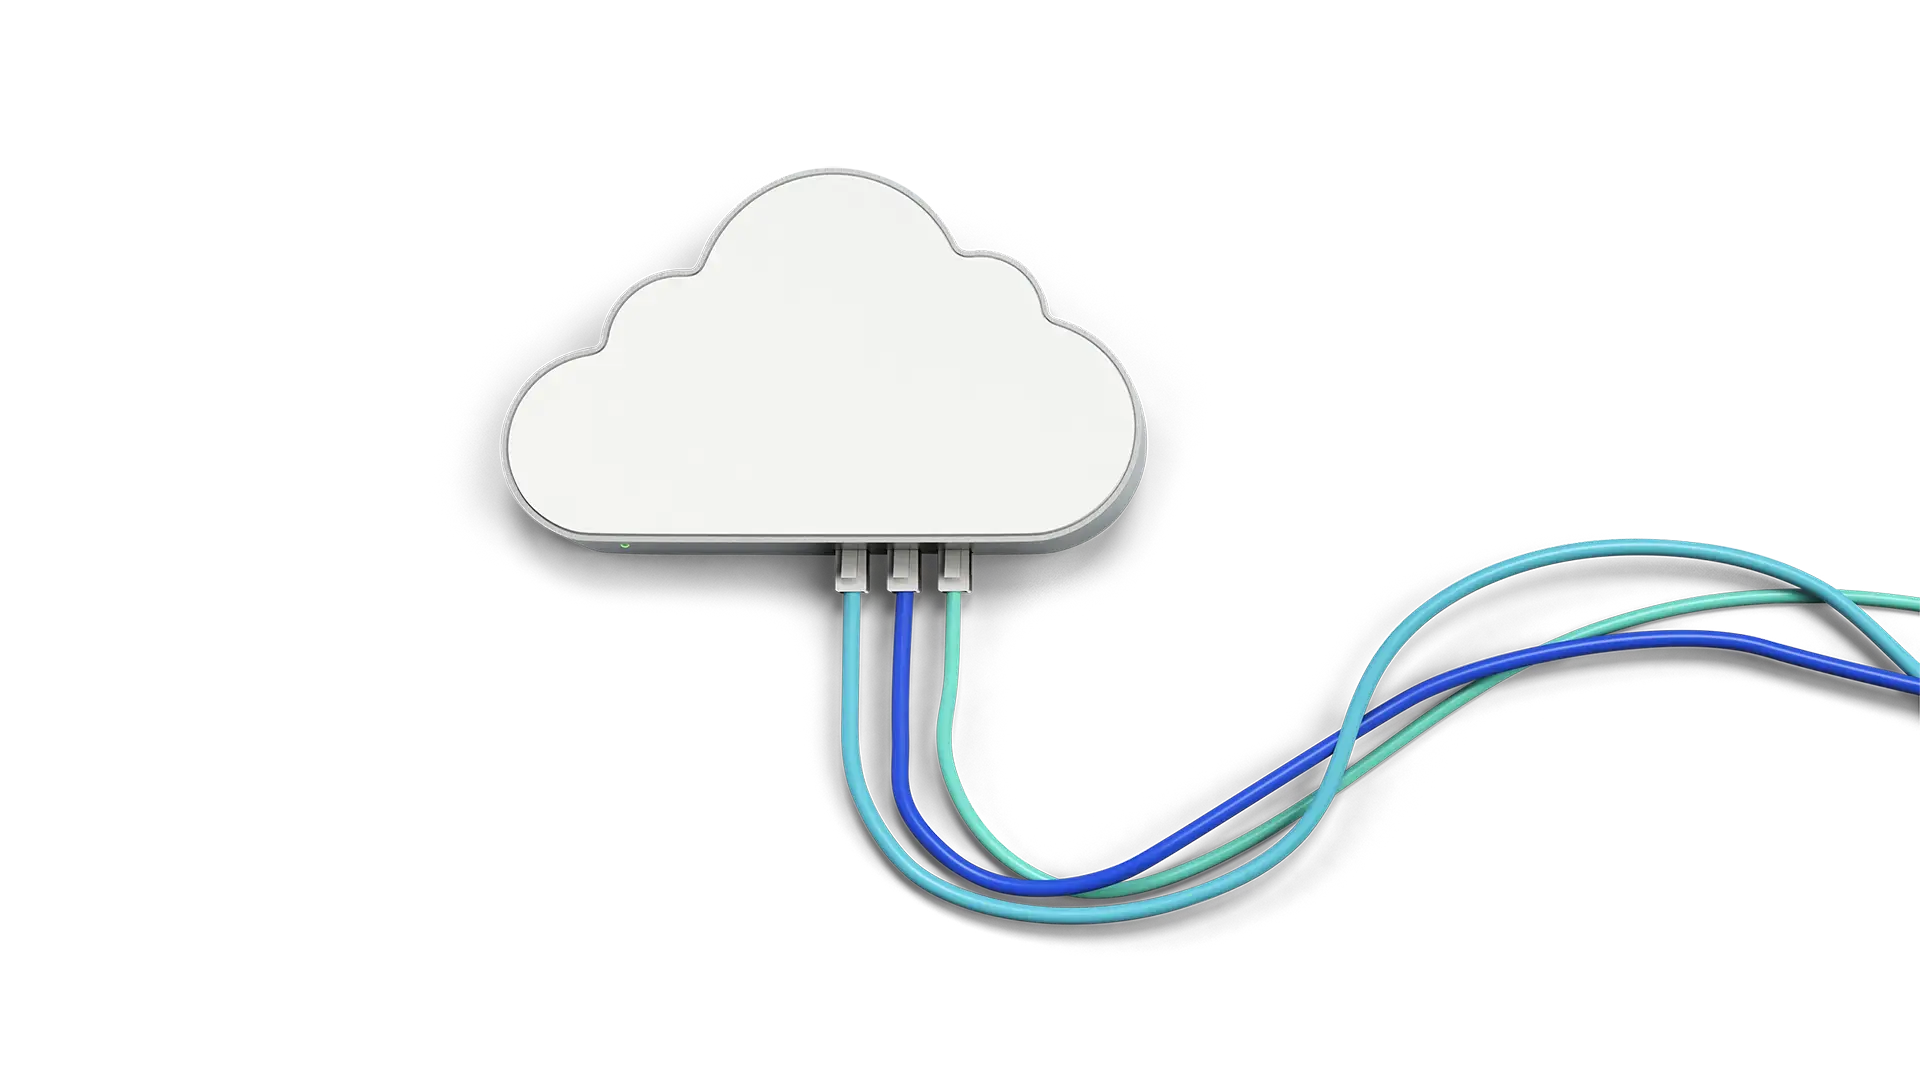 RJ45 cables connected to cloud